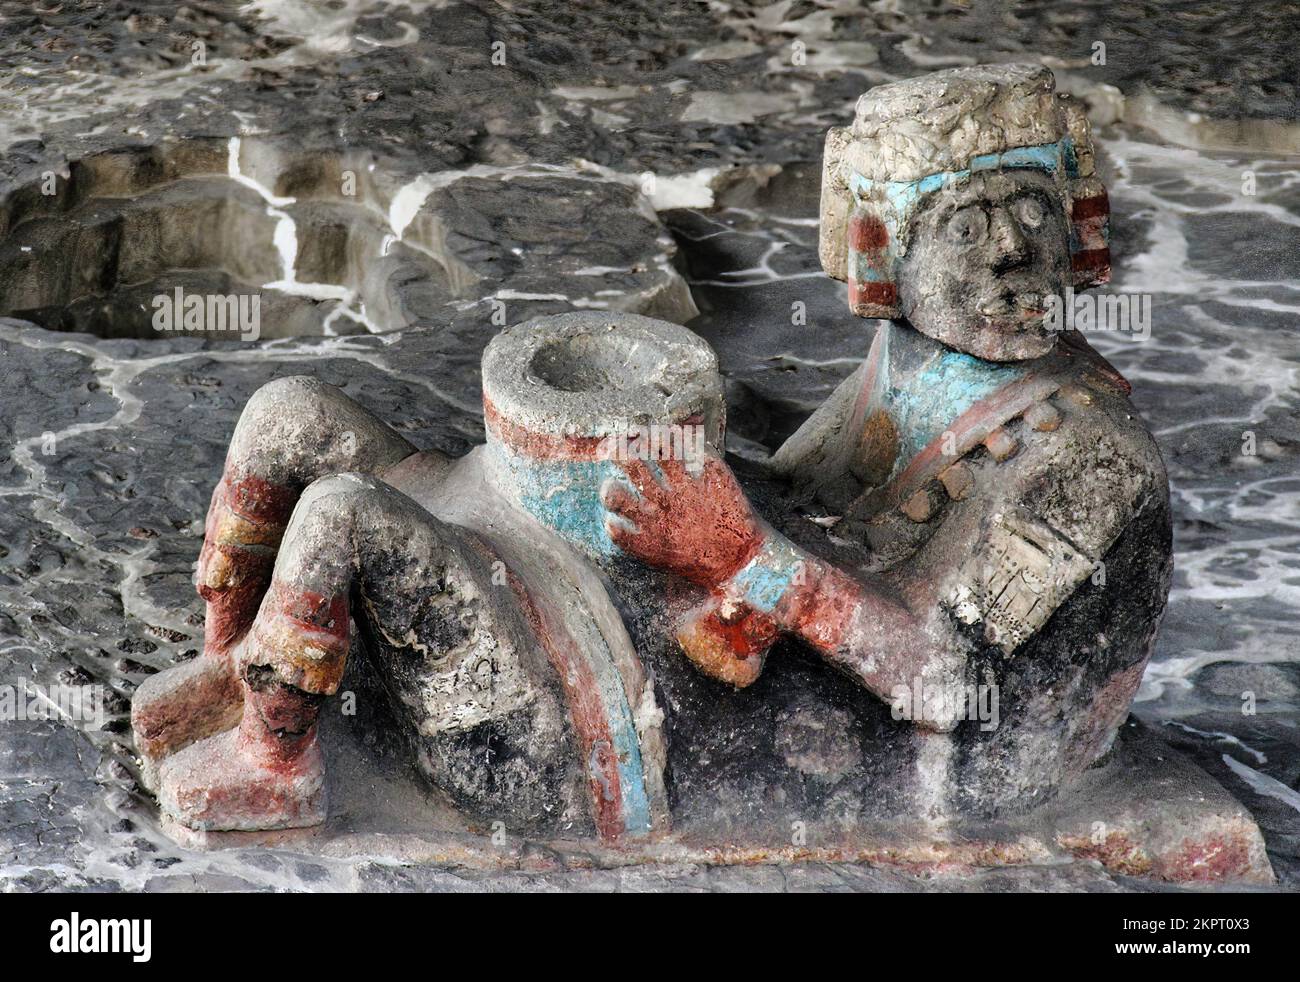 Ancient Aztec Chacmool Offering Statue Templo Mayor Mexico City Mexico Stock Photo